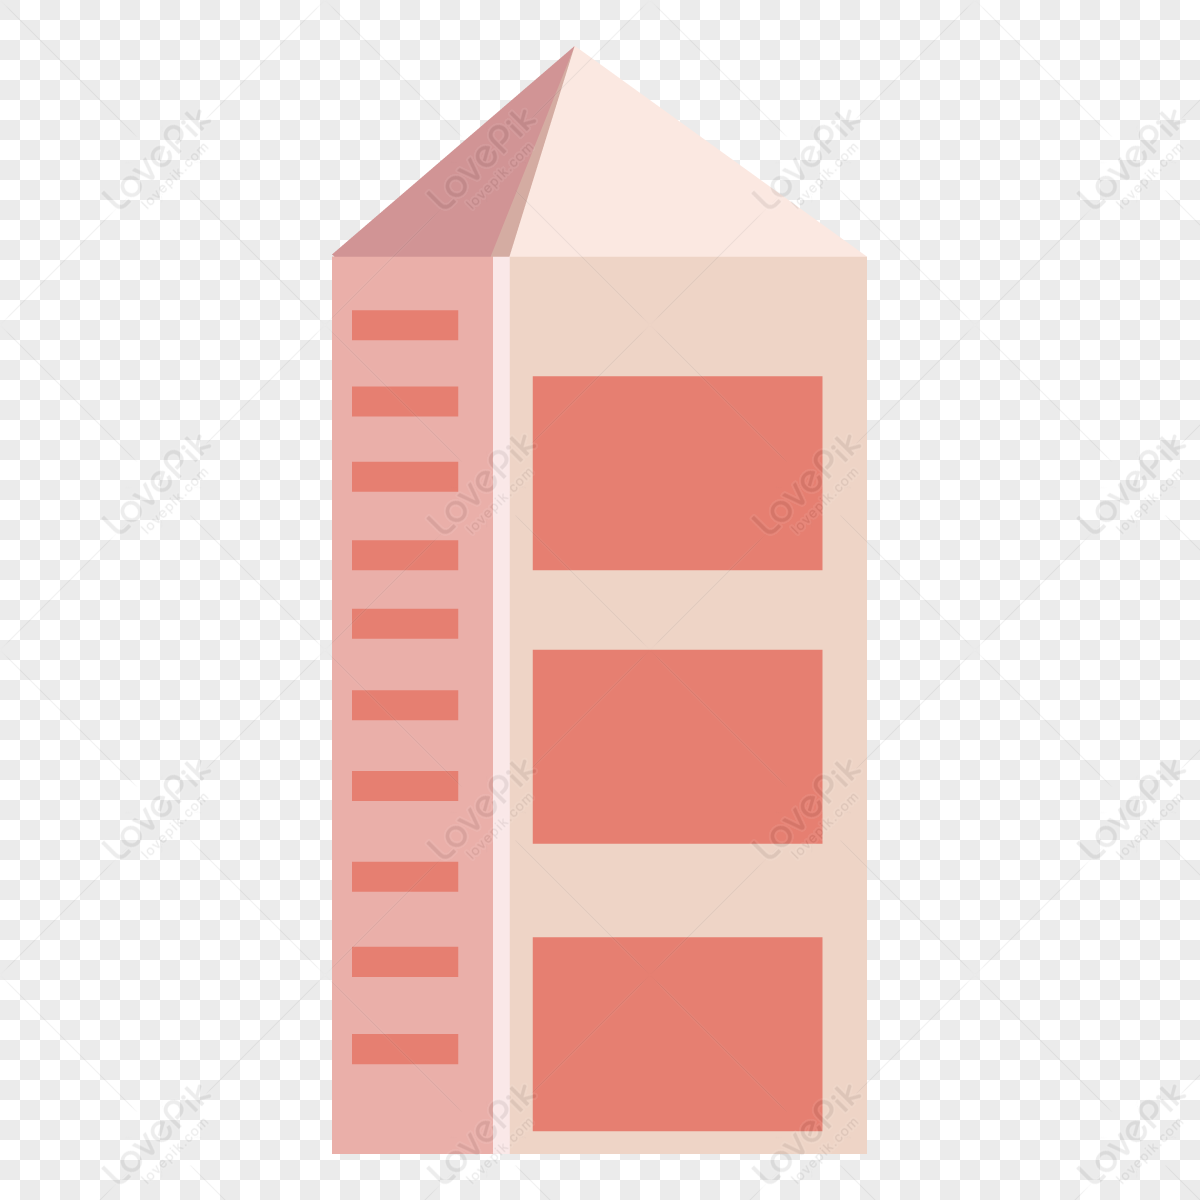 Building House PNG Transparent Image And Clipart Image For Free ...